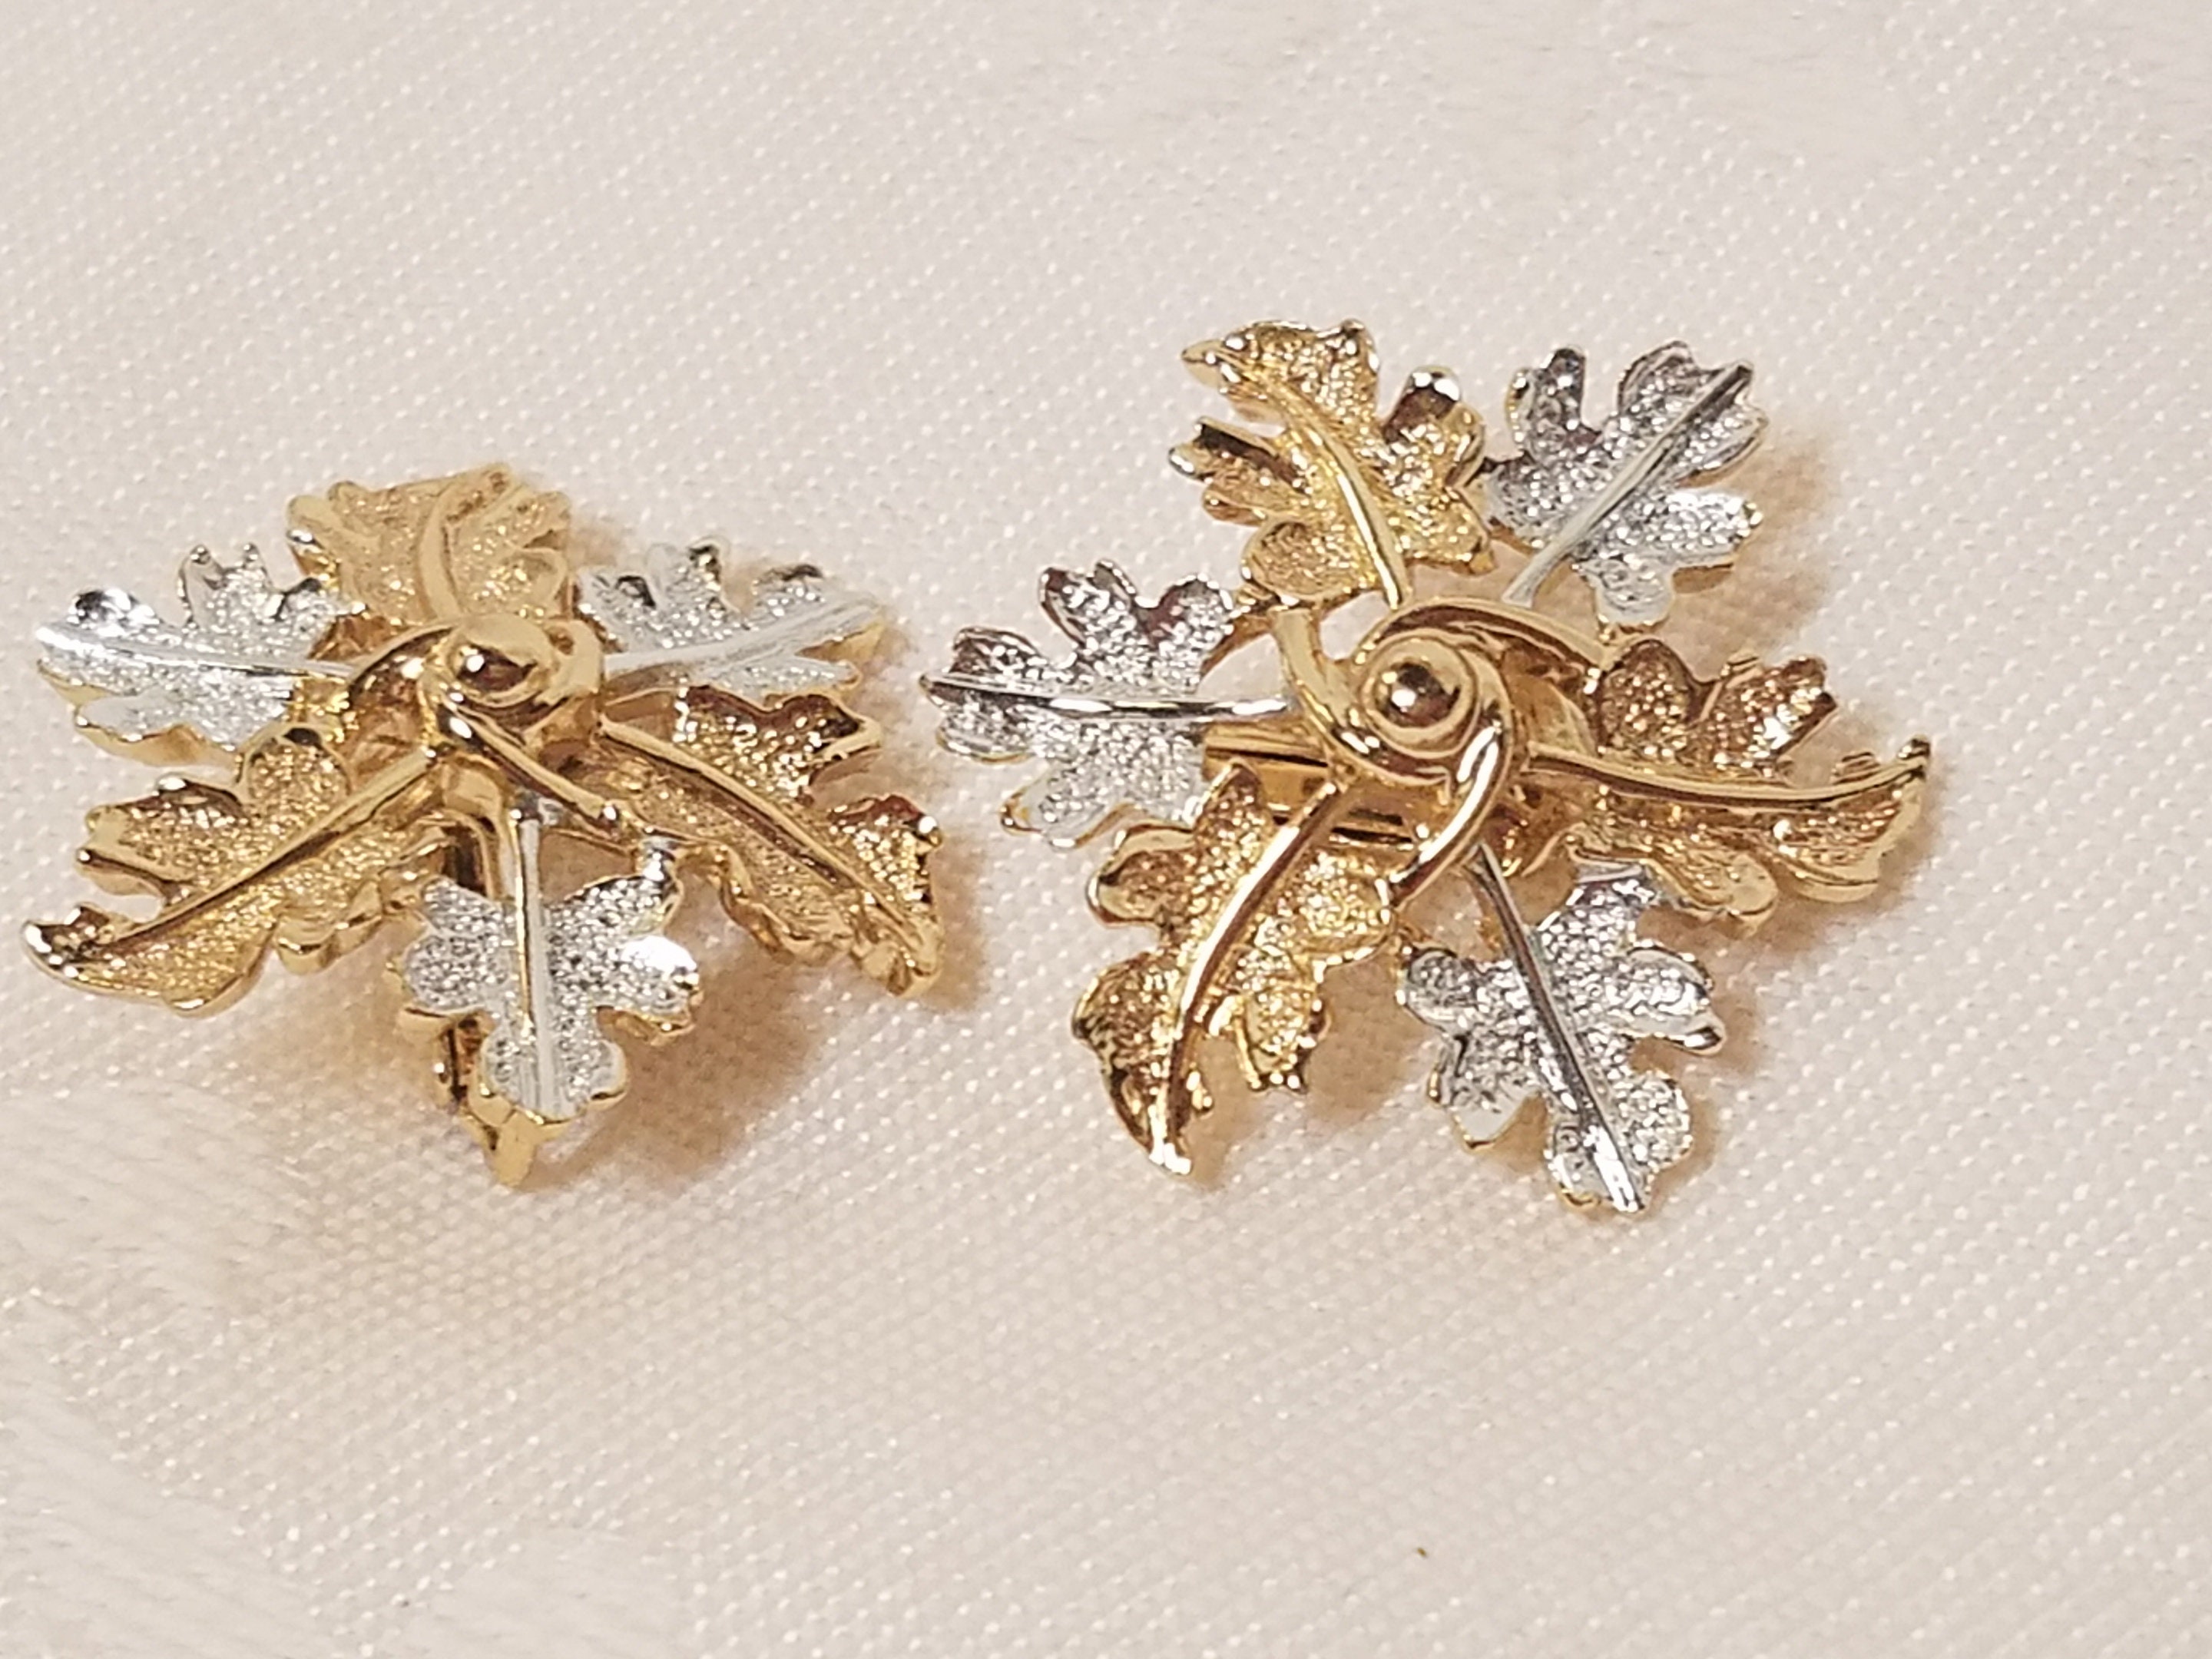 Vintage Sarah Coventry gold and silver leaves/snowflakes clip | Etsy